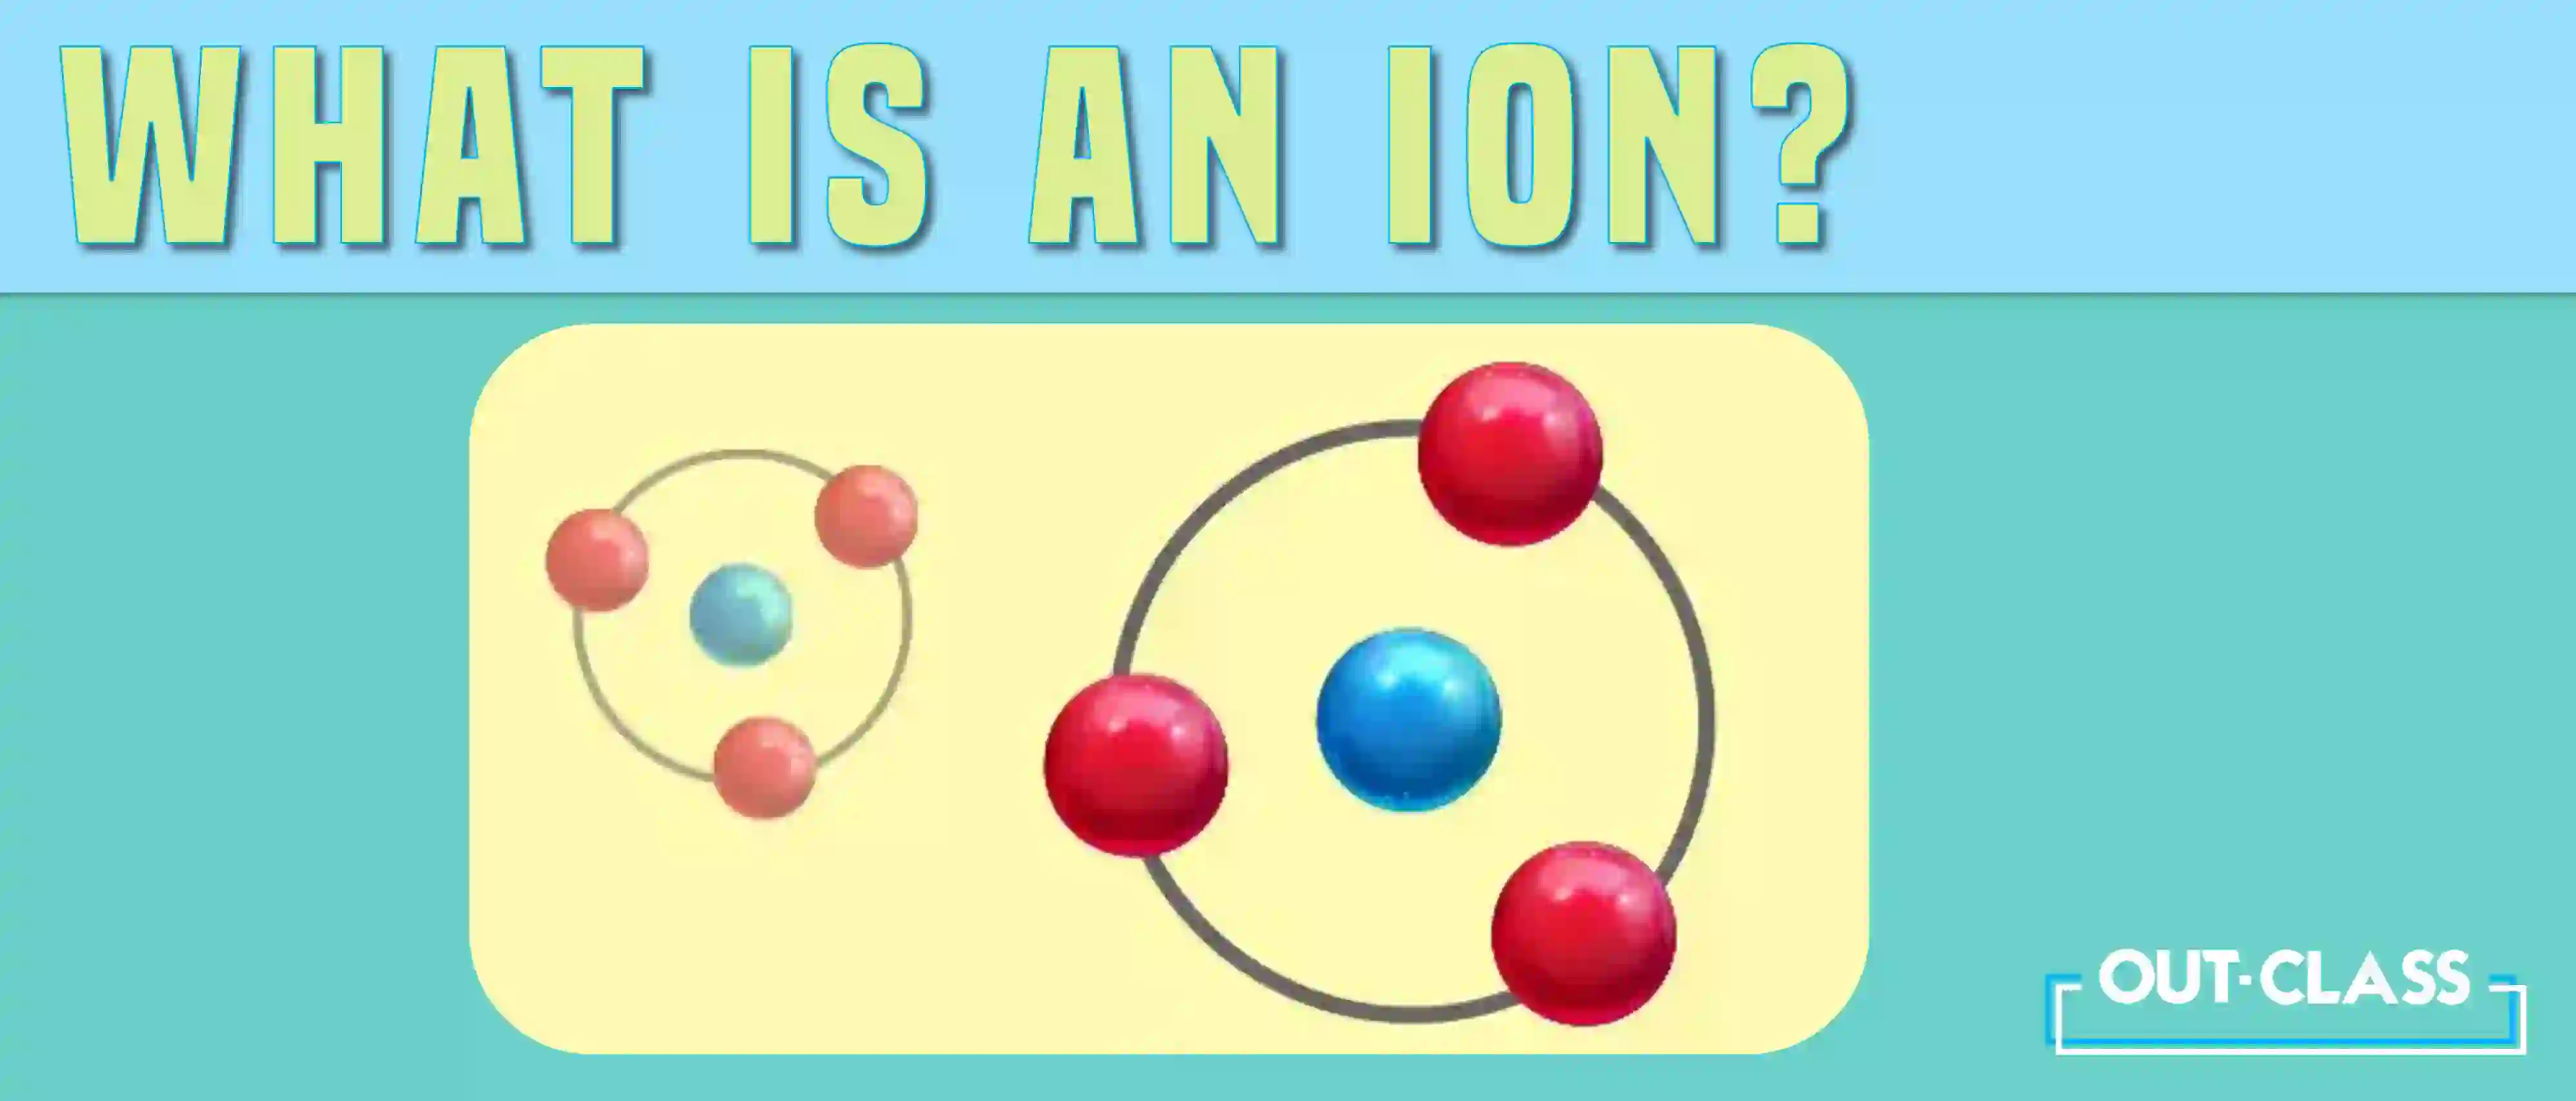 Usually, this process occurs so that the atom can gain a full outer shell of electrons, a more stable arrangement of electrons. When an atom gains electrons, it becomes negatively charged and is called an anion. When an atom loses electrons, it becomes positively charged and is called a cation.